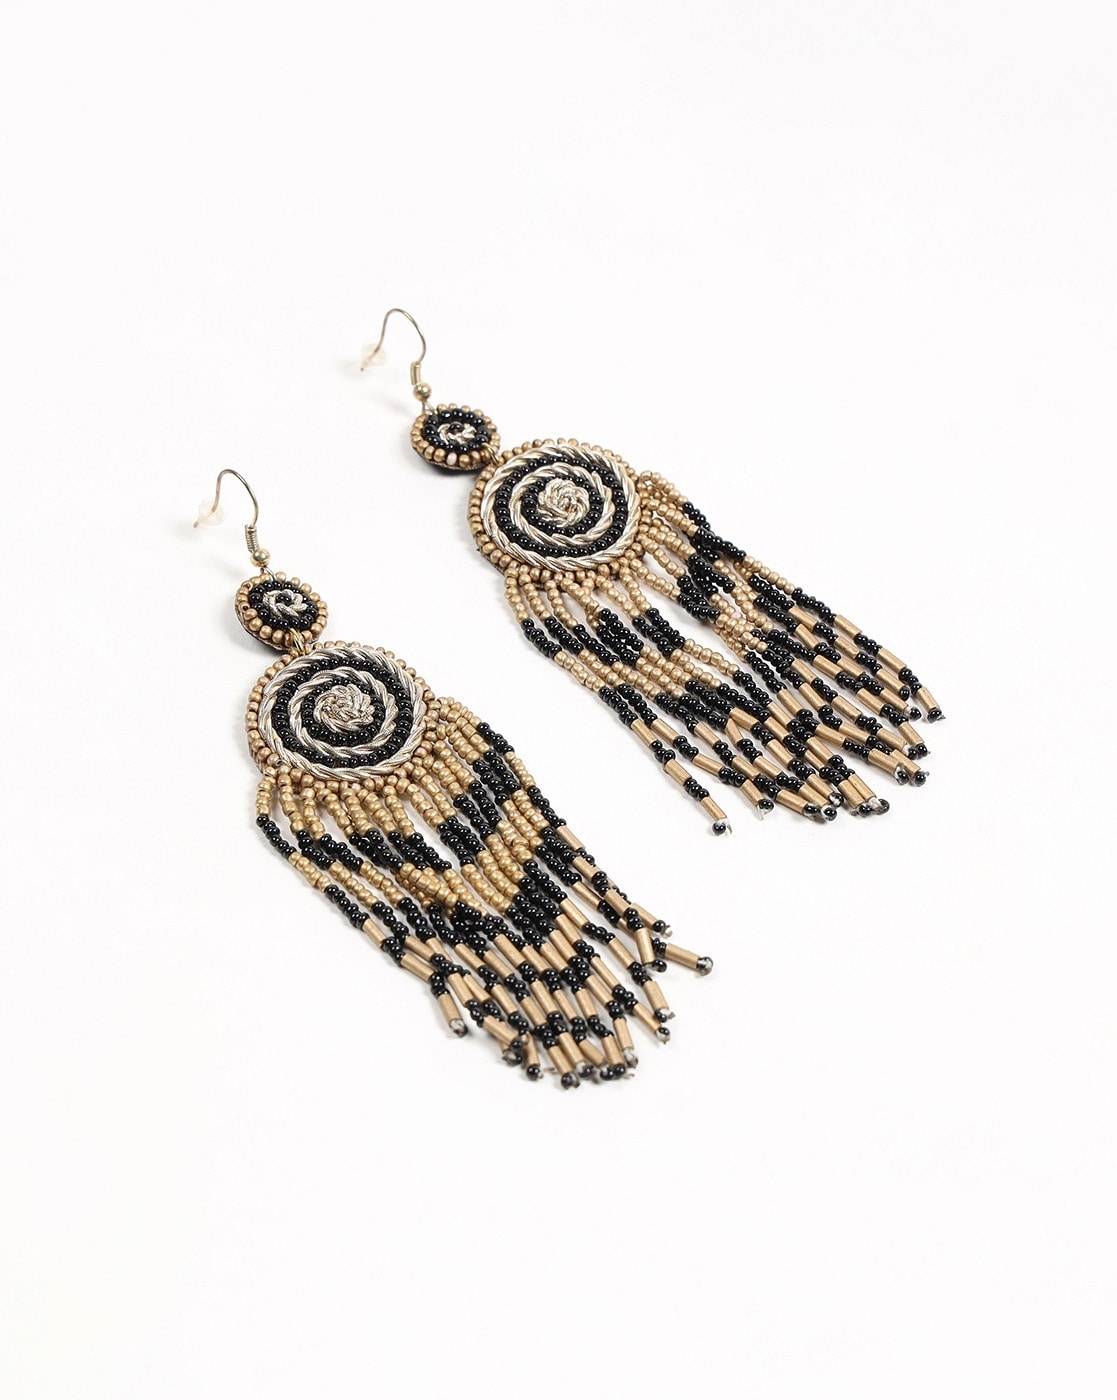 Buy Earrings for Women & Girls Online [Latest Designs] – Outhouse Jewellery